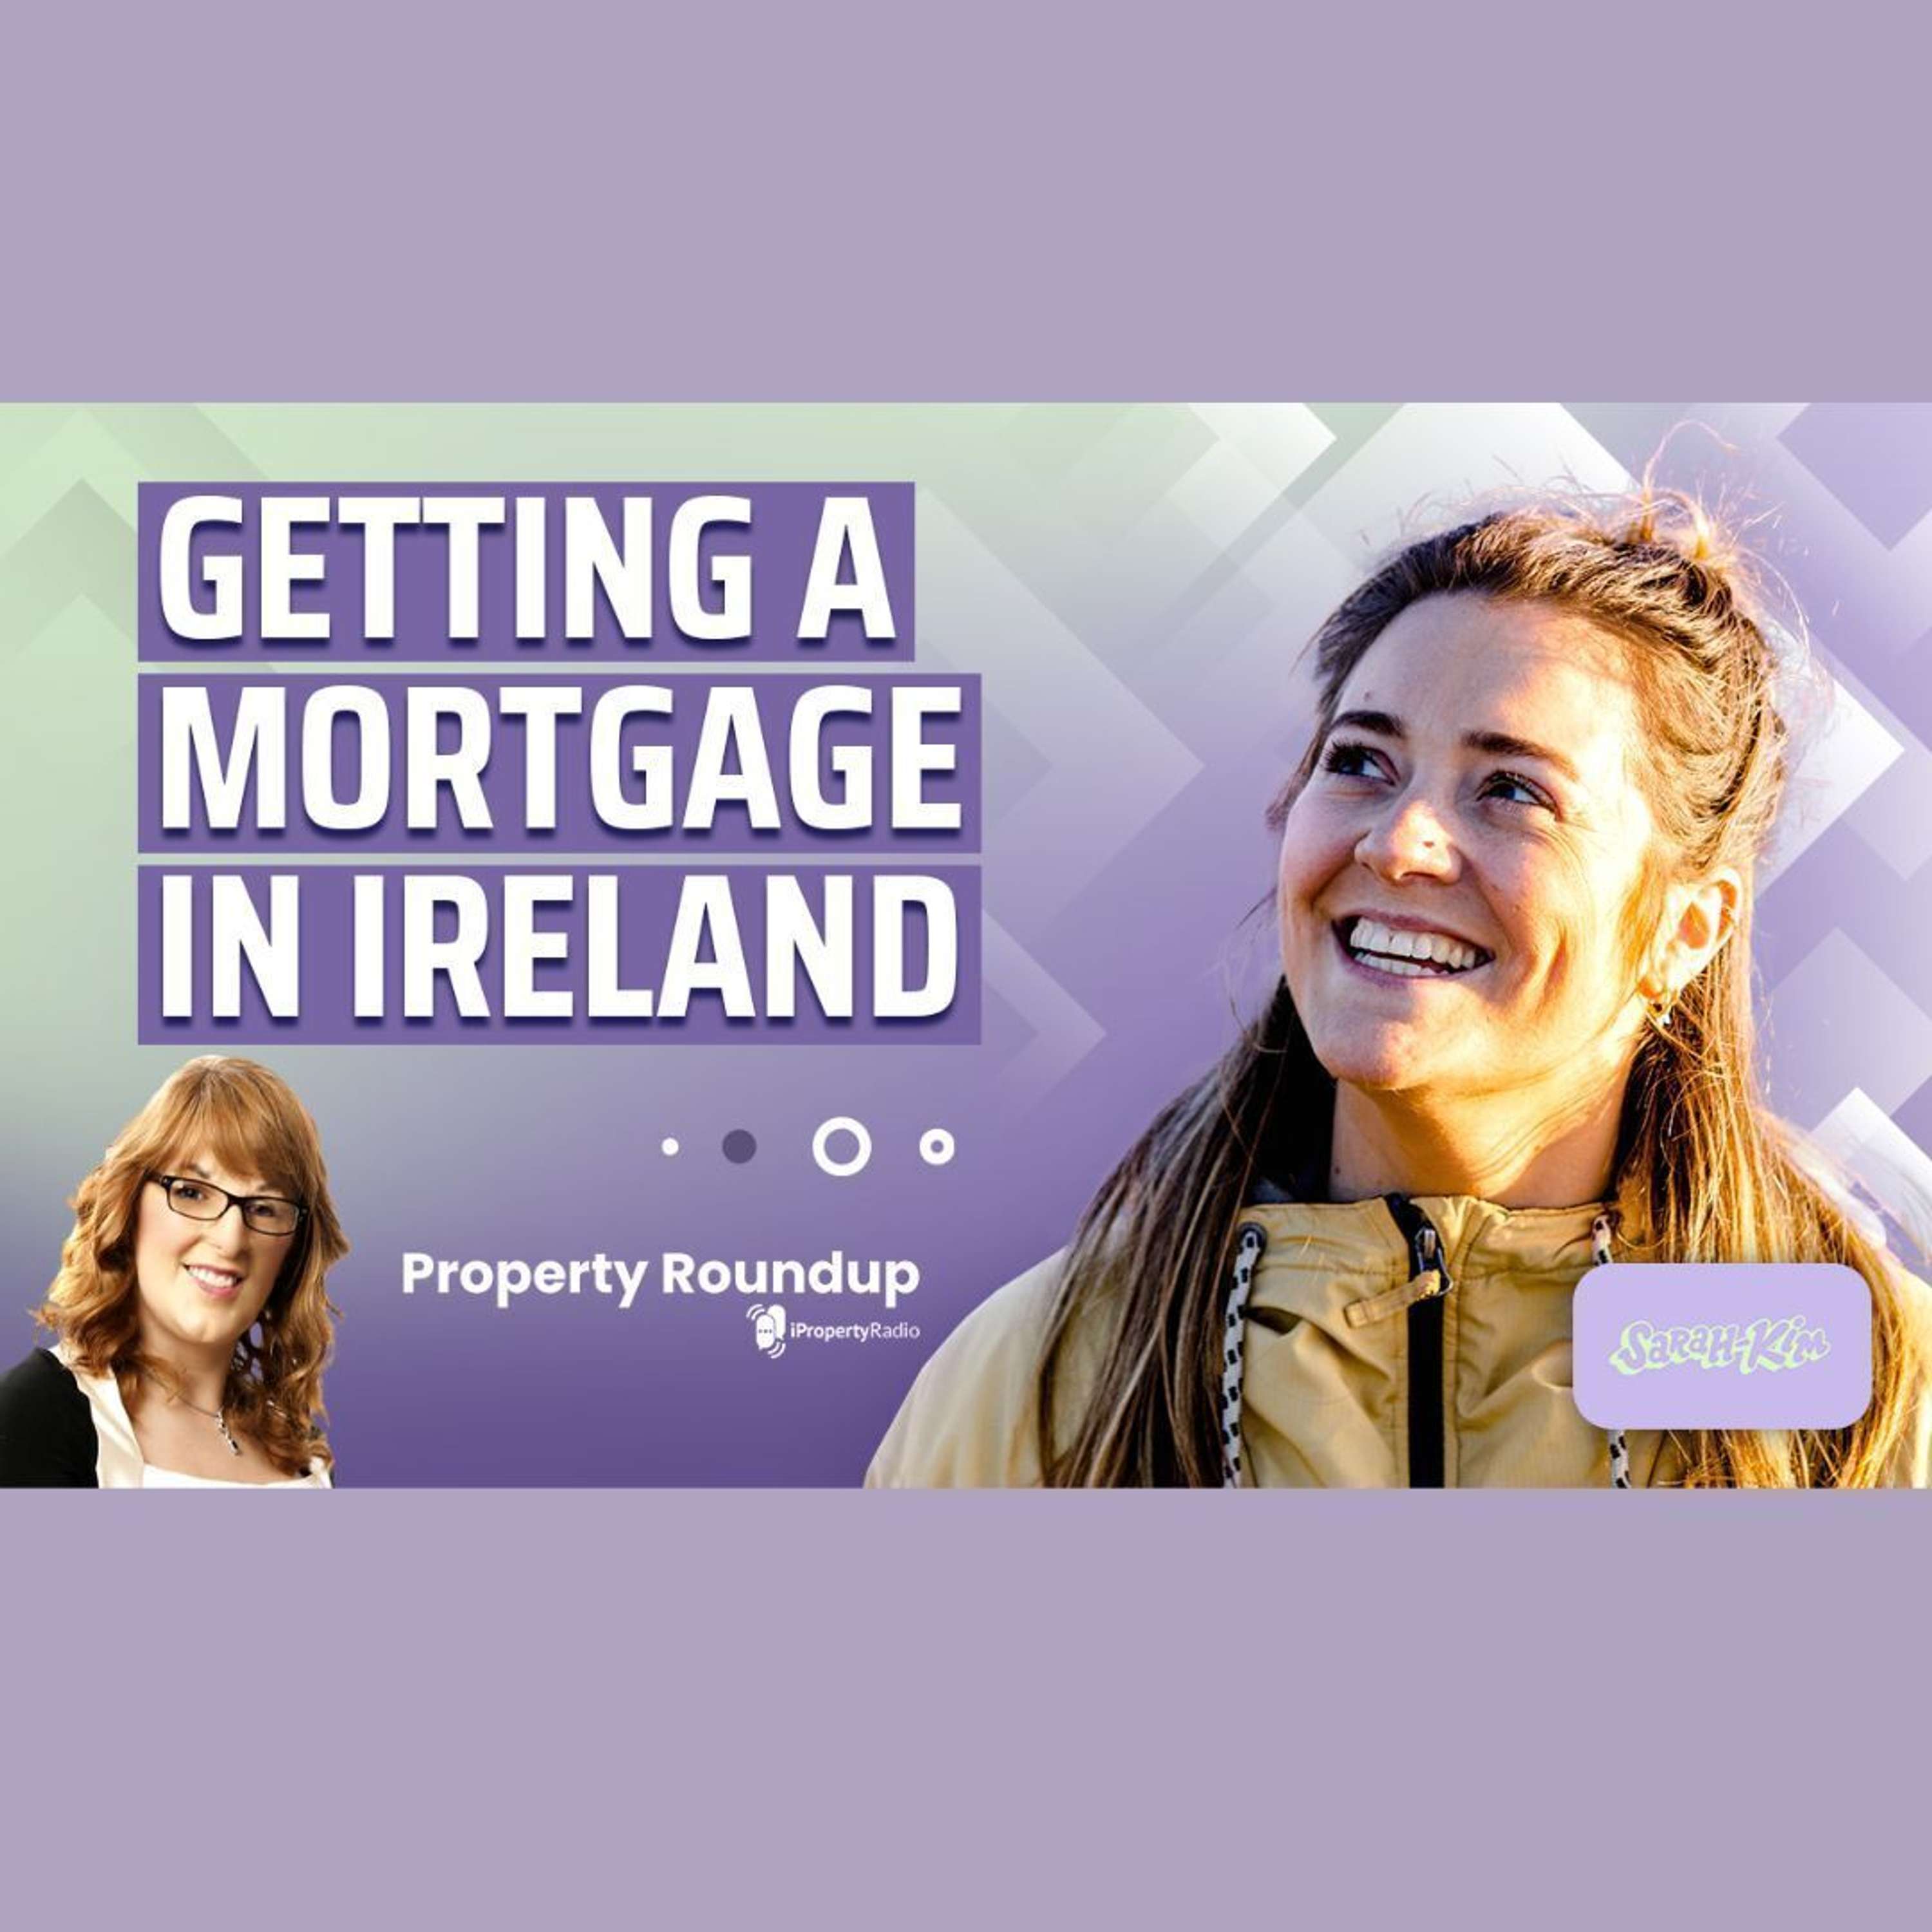 Securing a mortgage in Ireland